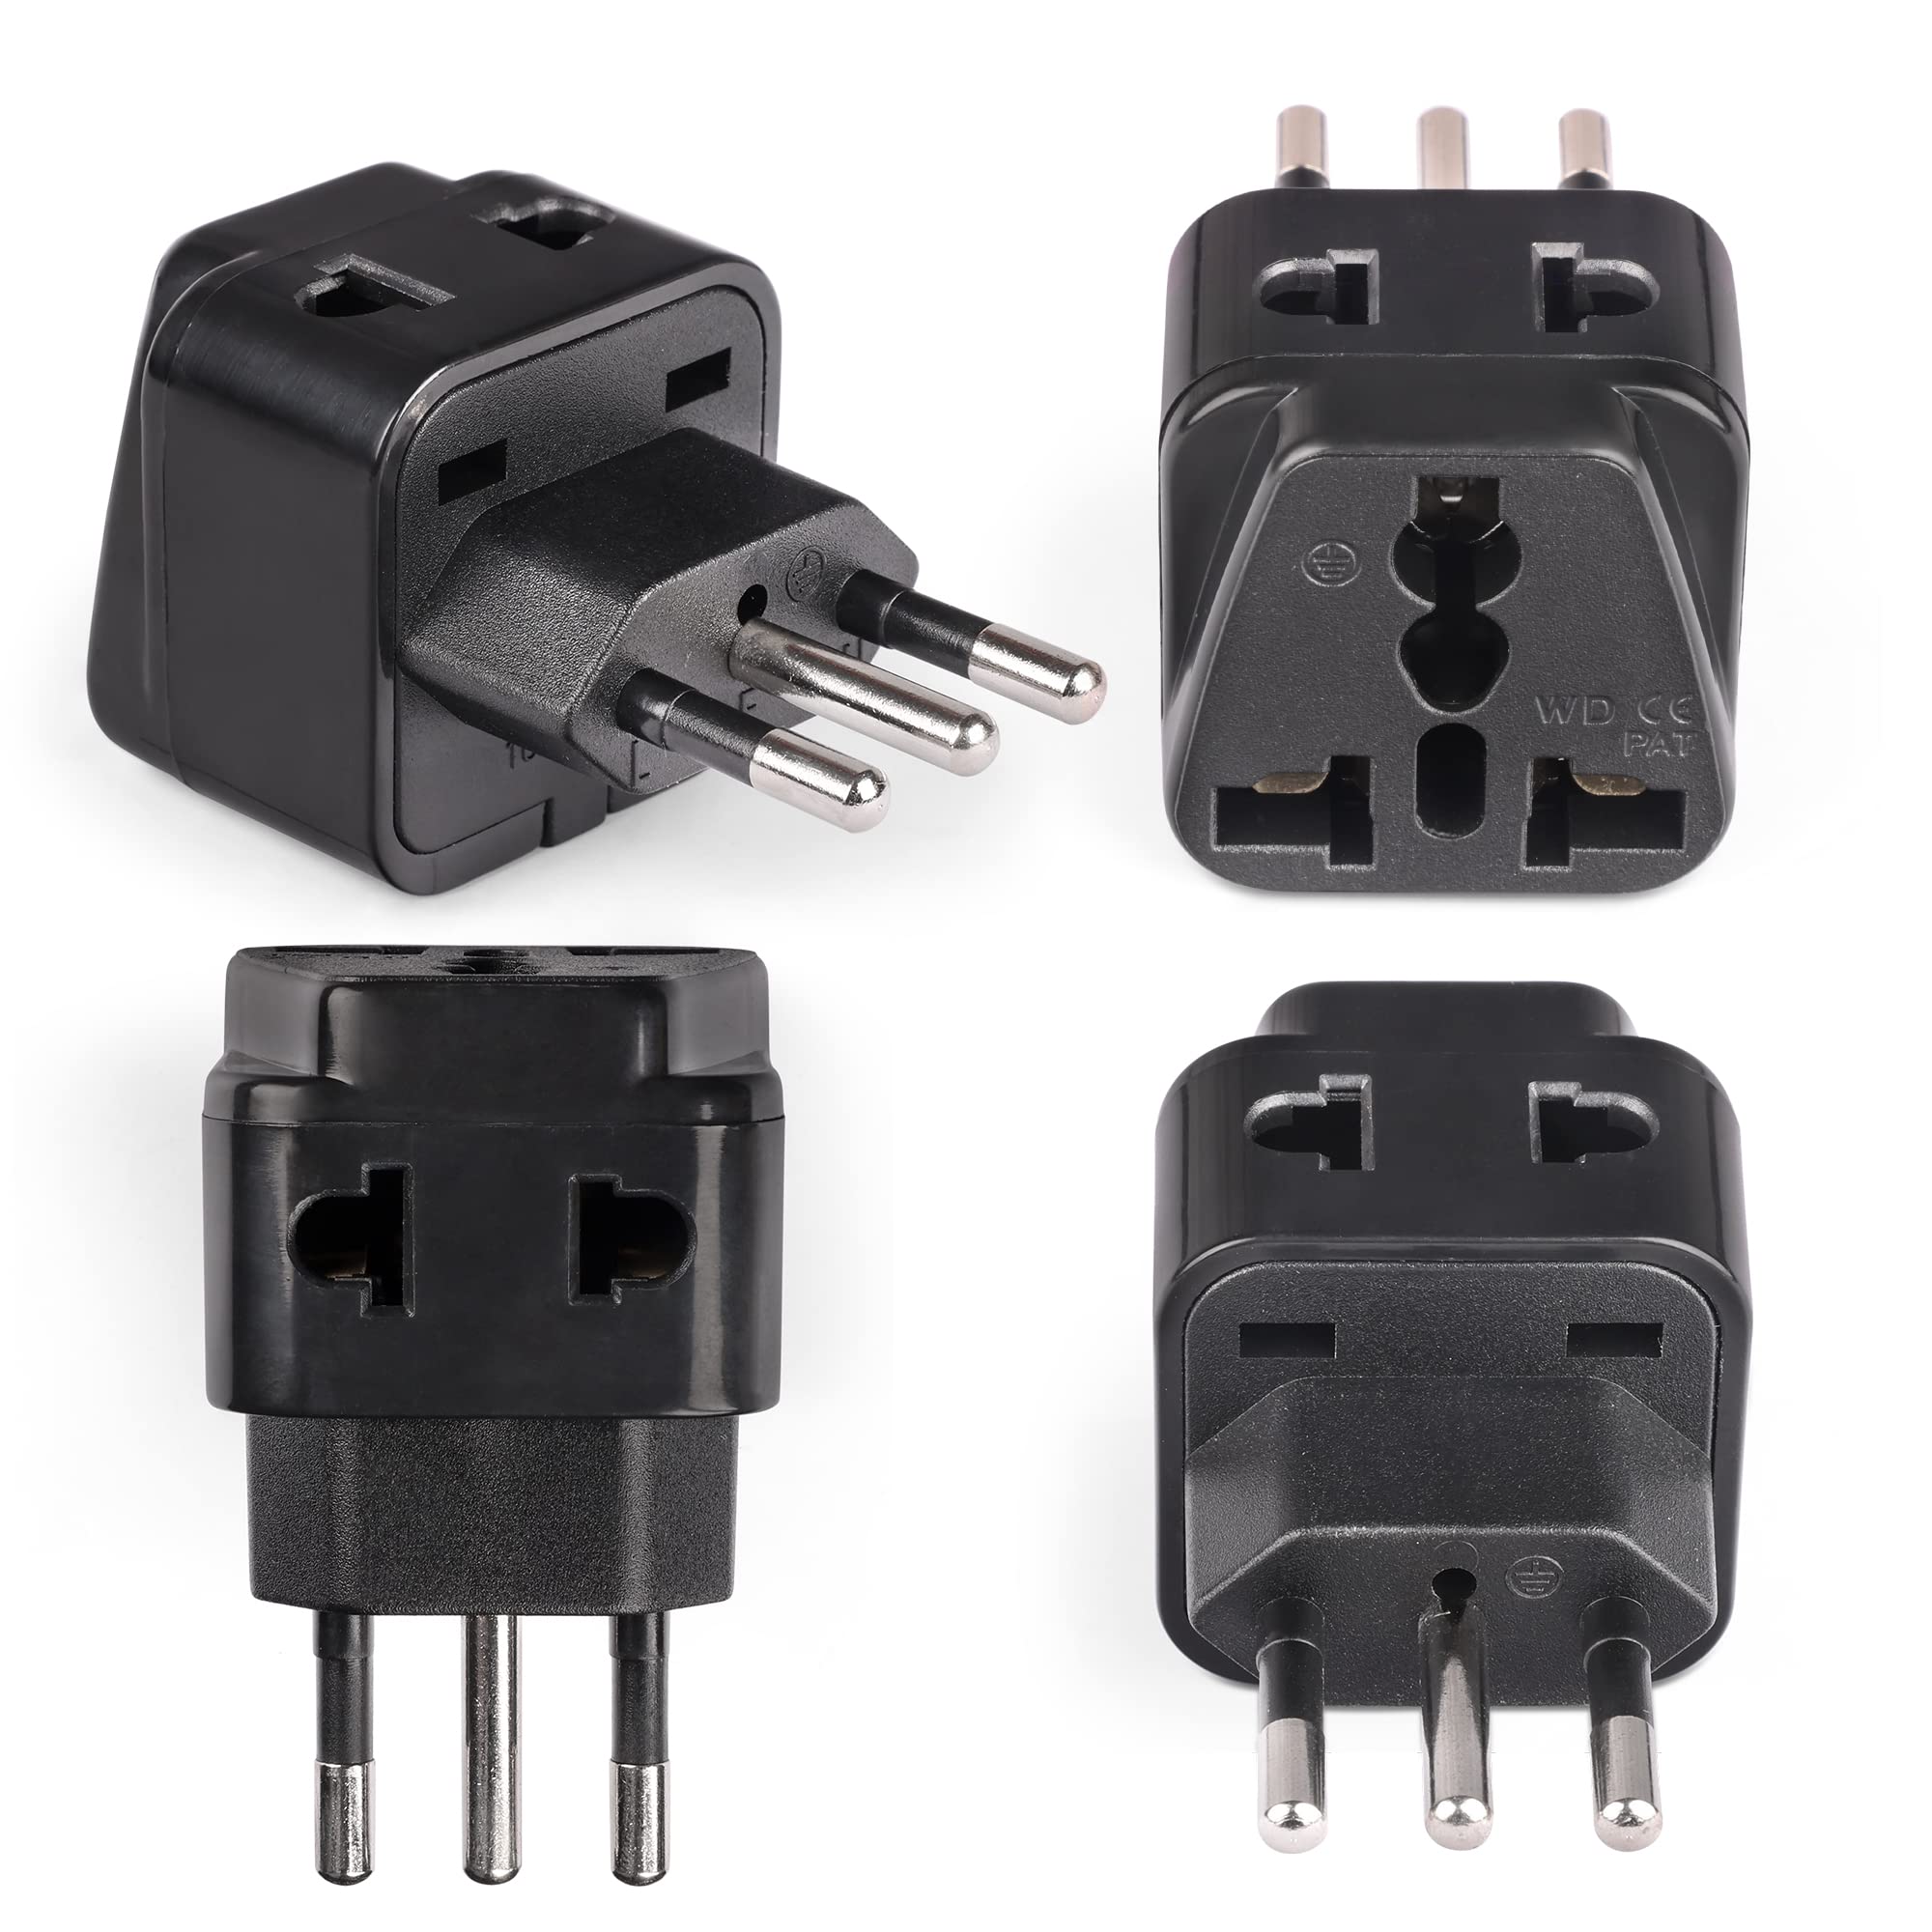 What Plug Adapter Do I Need For Chile